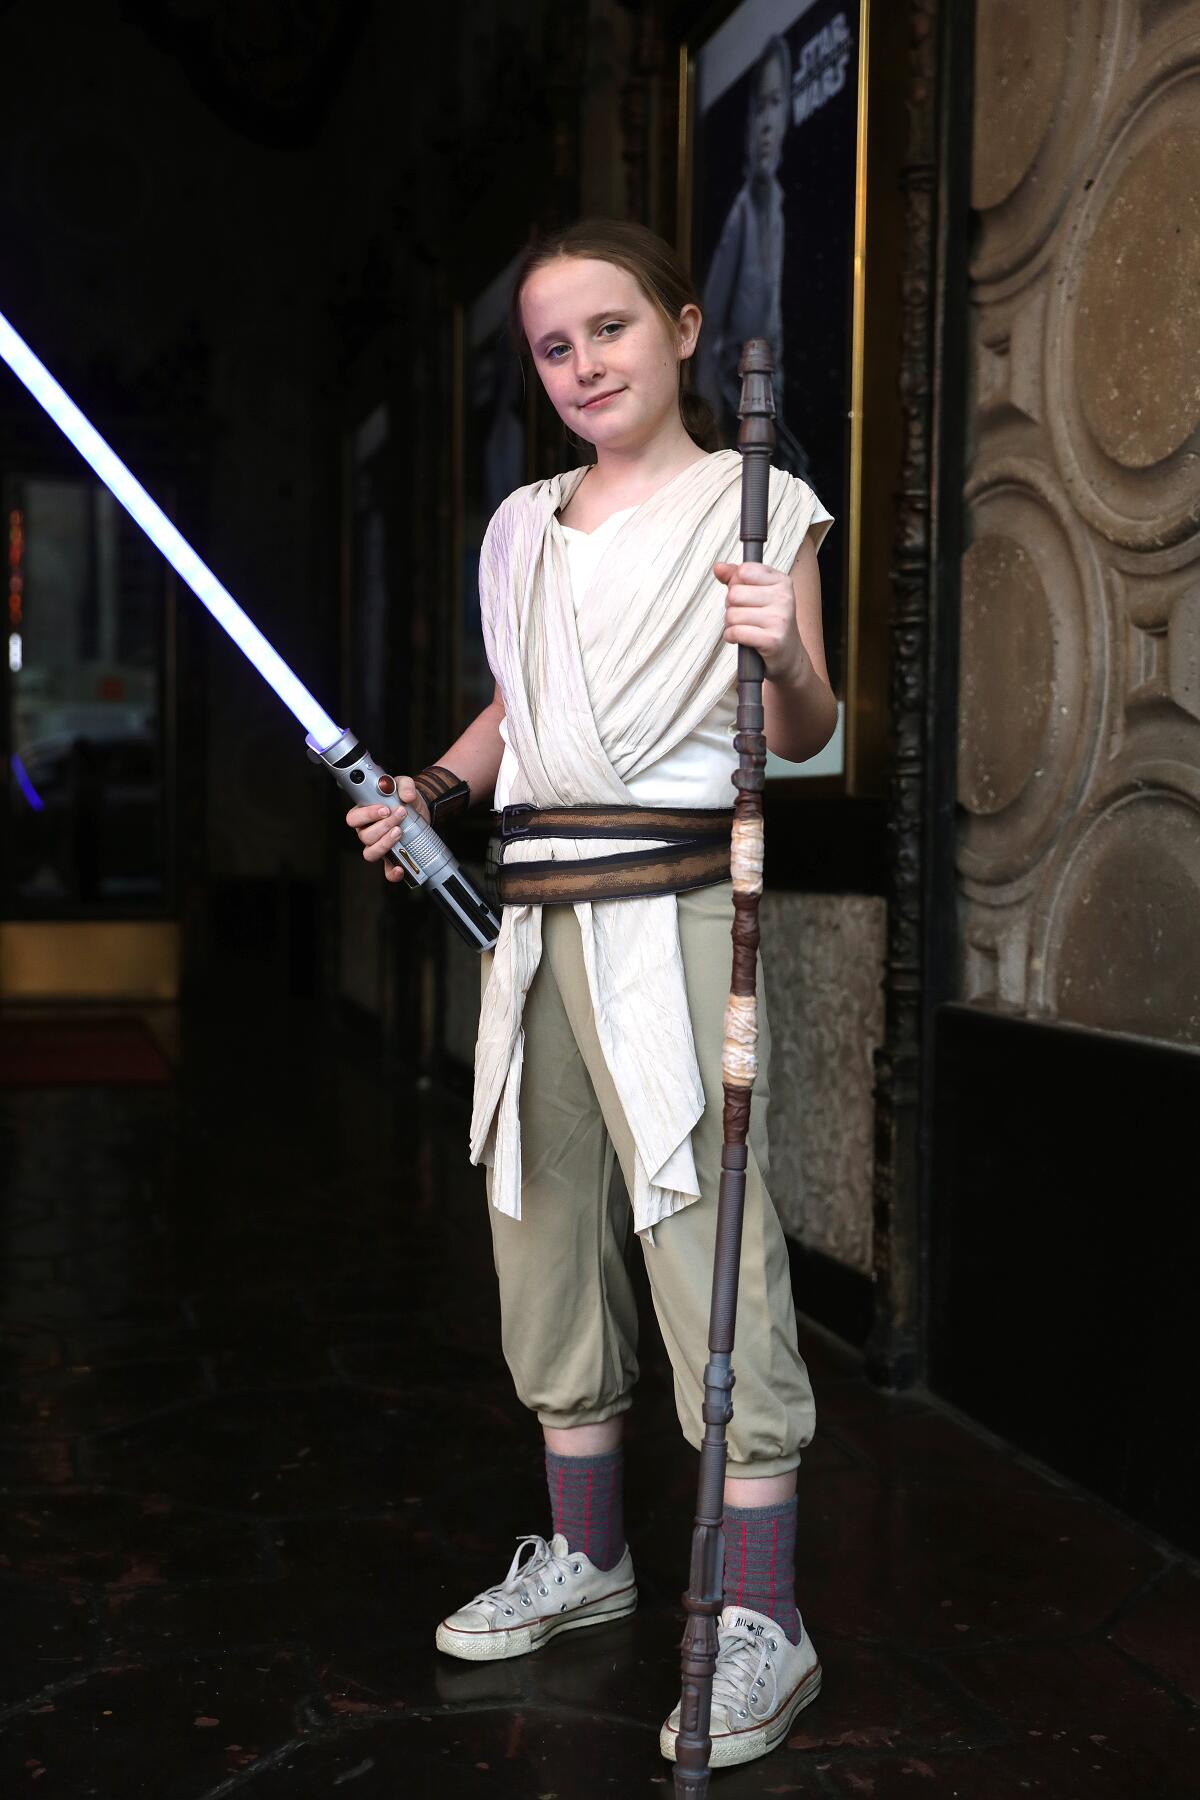 Lindalee Rose, 11, of Los Angeles dressed as Rey for the “Star Wars” marathon at the El Capitan Theatre.